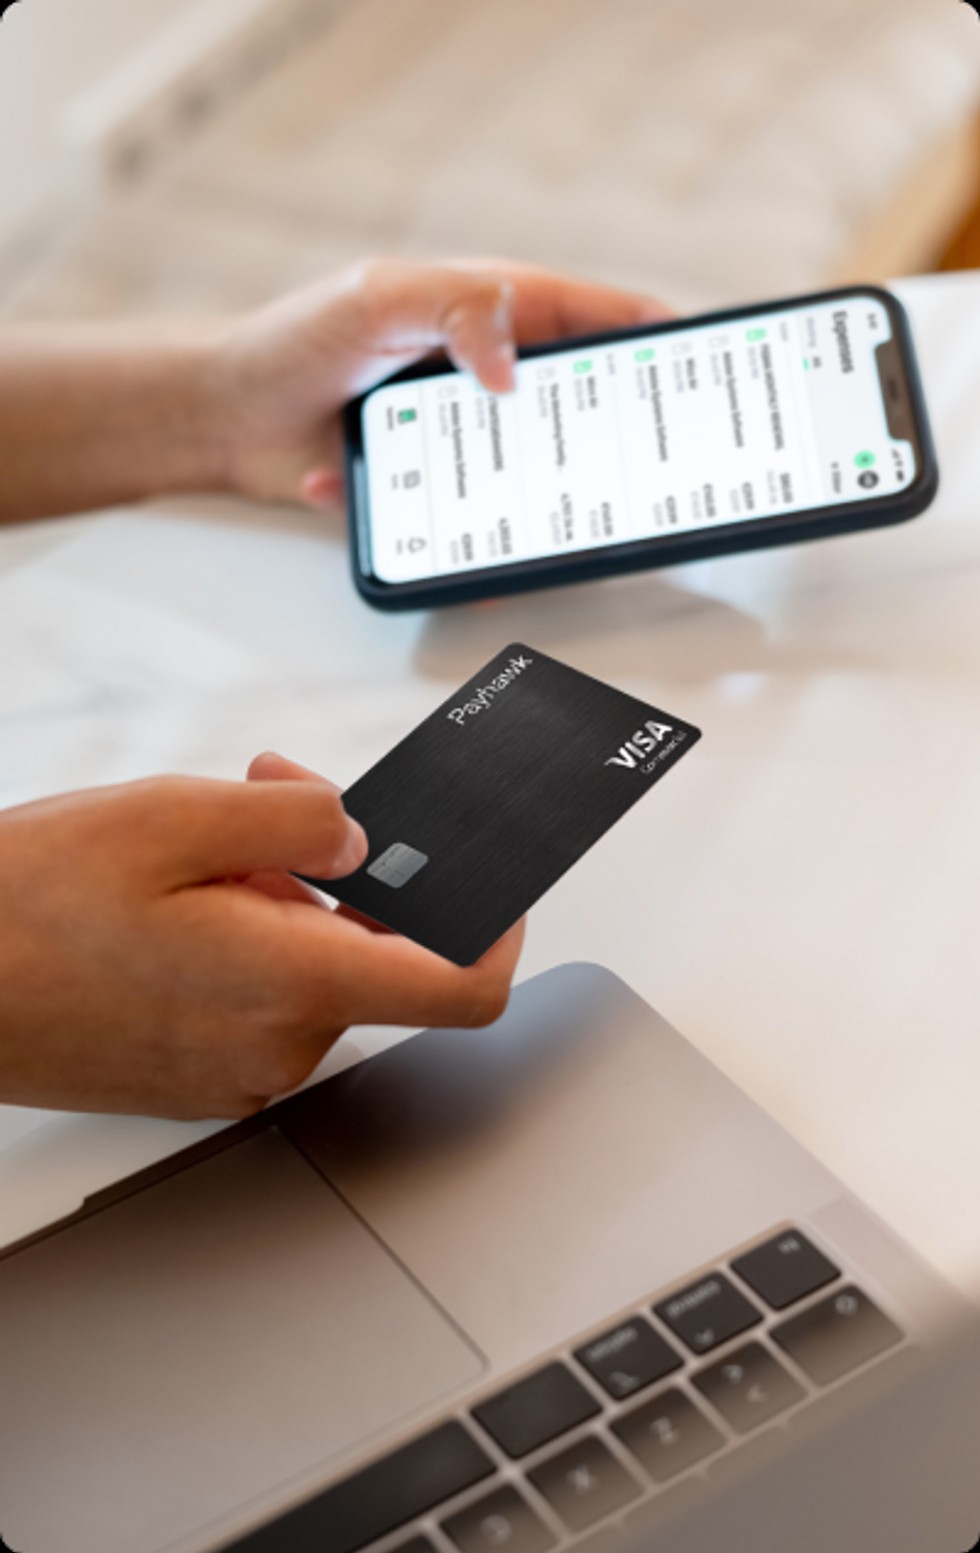 Control card spending at scale with corporate cards